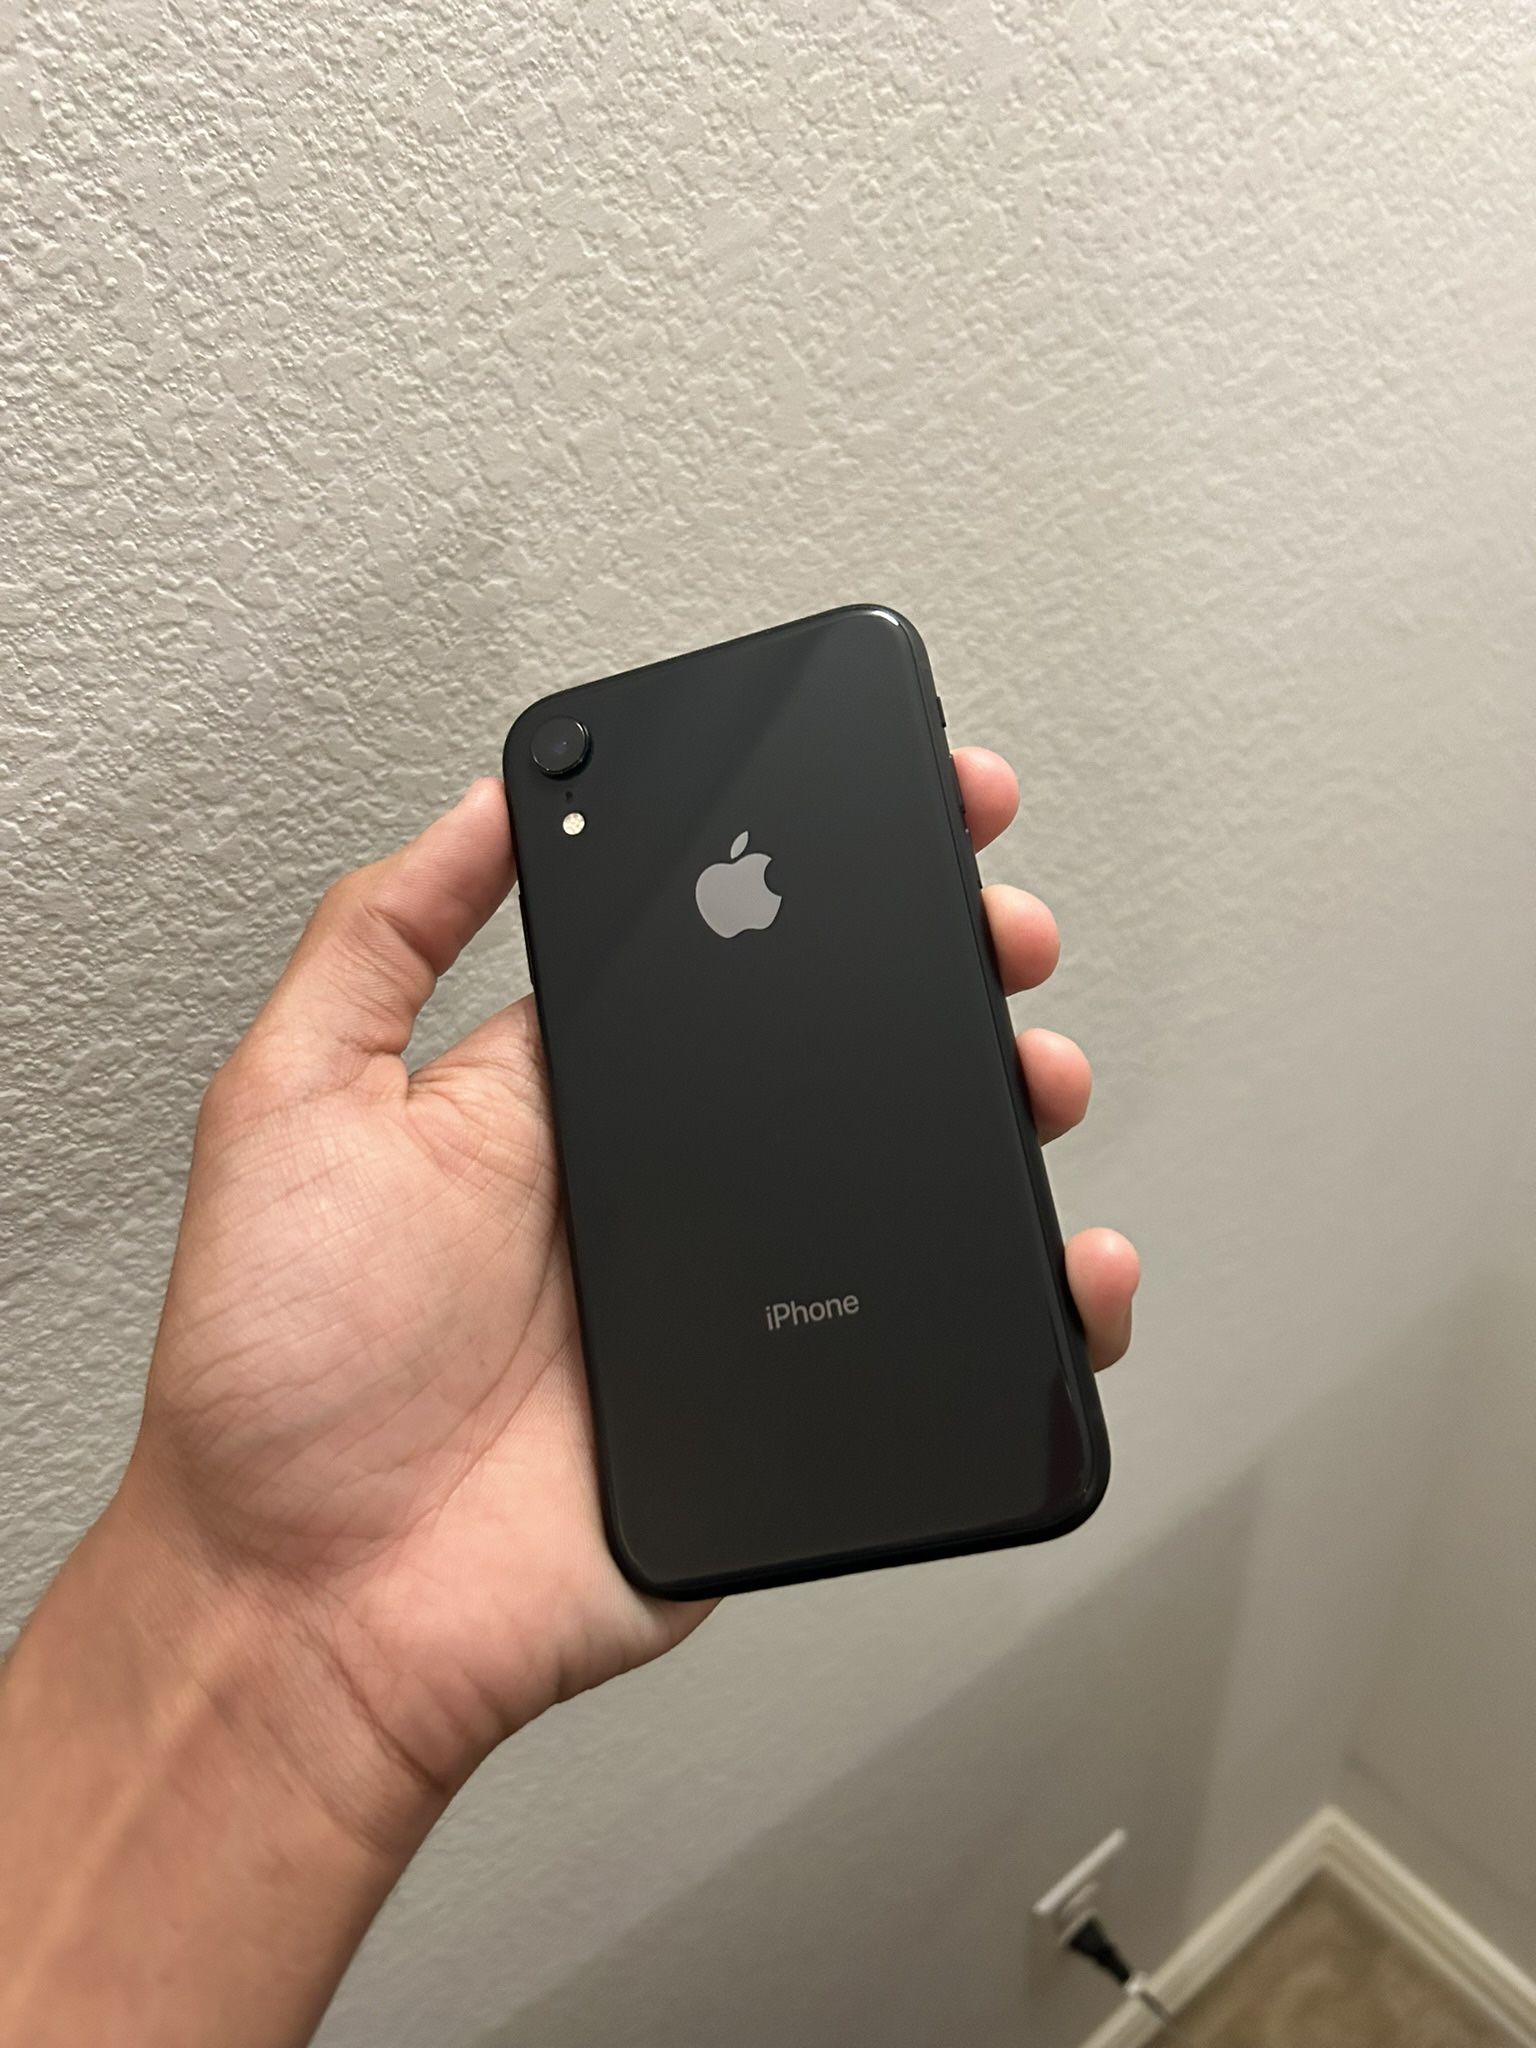 iPhone XR 64gb Unlocked/Liberados For All Carriers-Perfect Condition